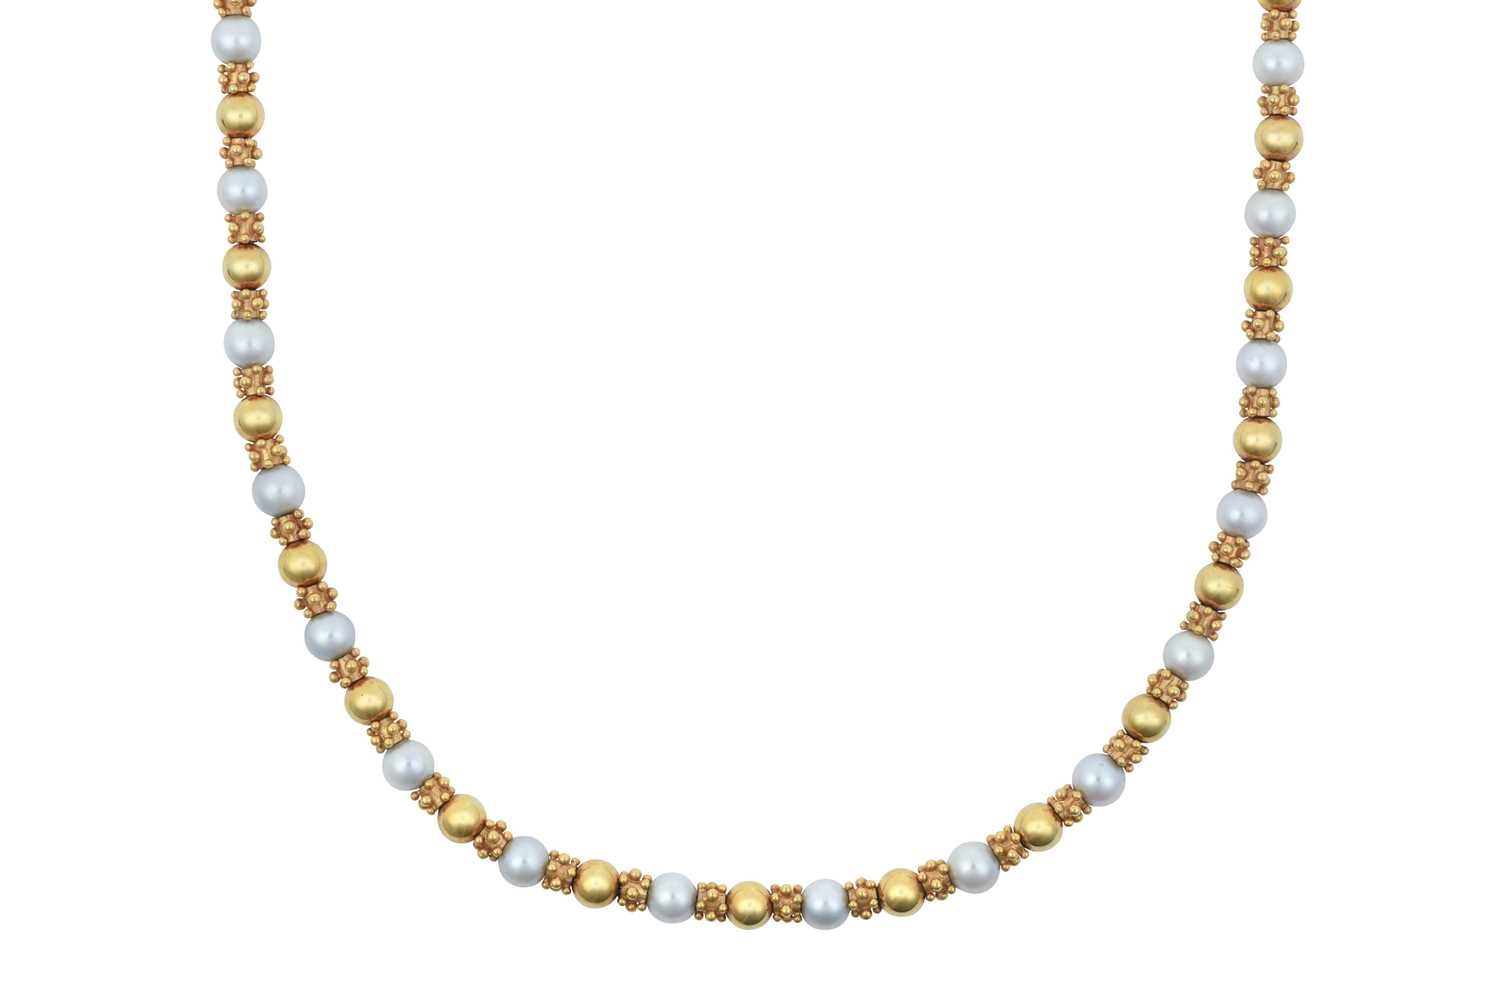 A 9 Carat Gold Cultured Pearl Necklace the cultured pearls spaced by yellow plain polished beads and